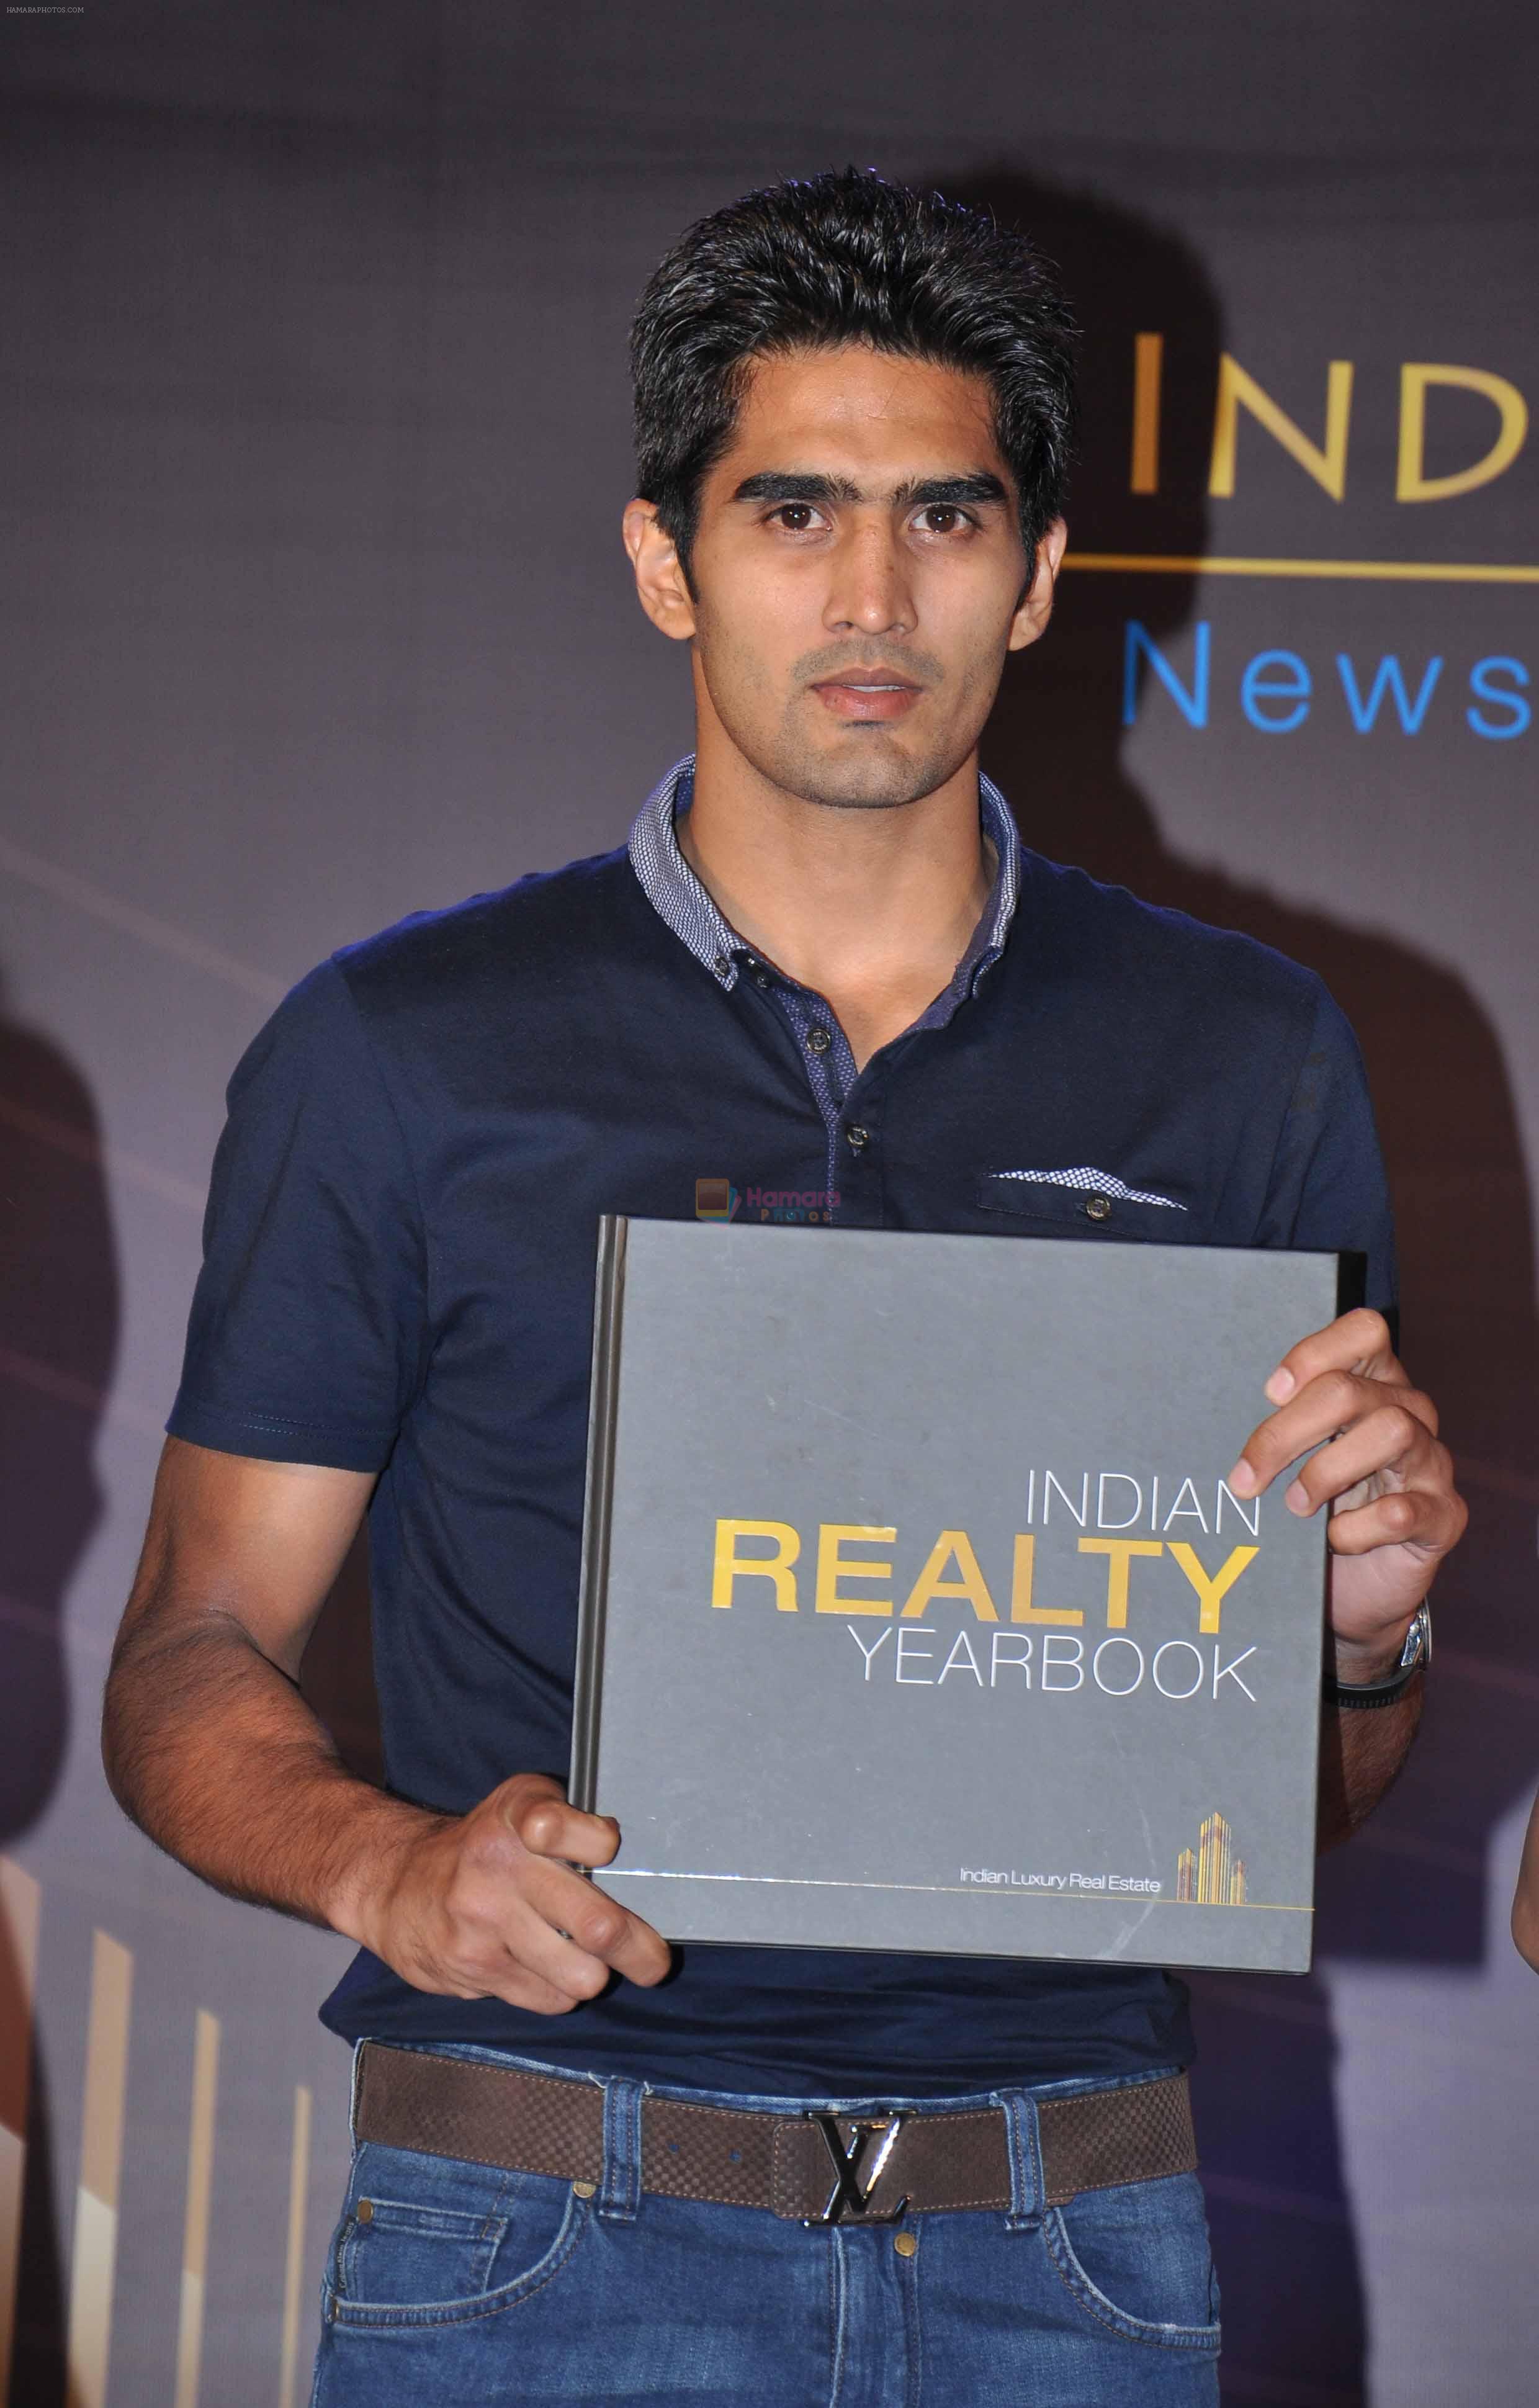 Vijender Singh launch India Realty Yearbook & Real Leaders at The premier Indian Realty Awards 2013 in New Delhi on 8th Oct 2013